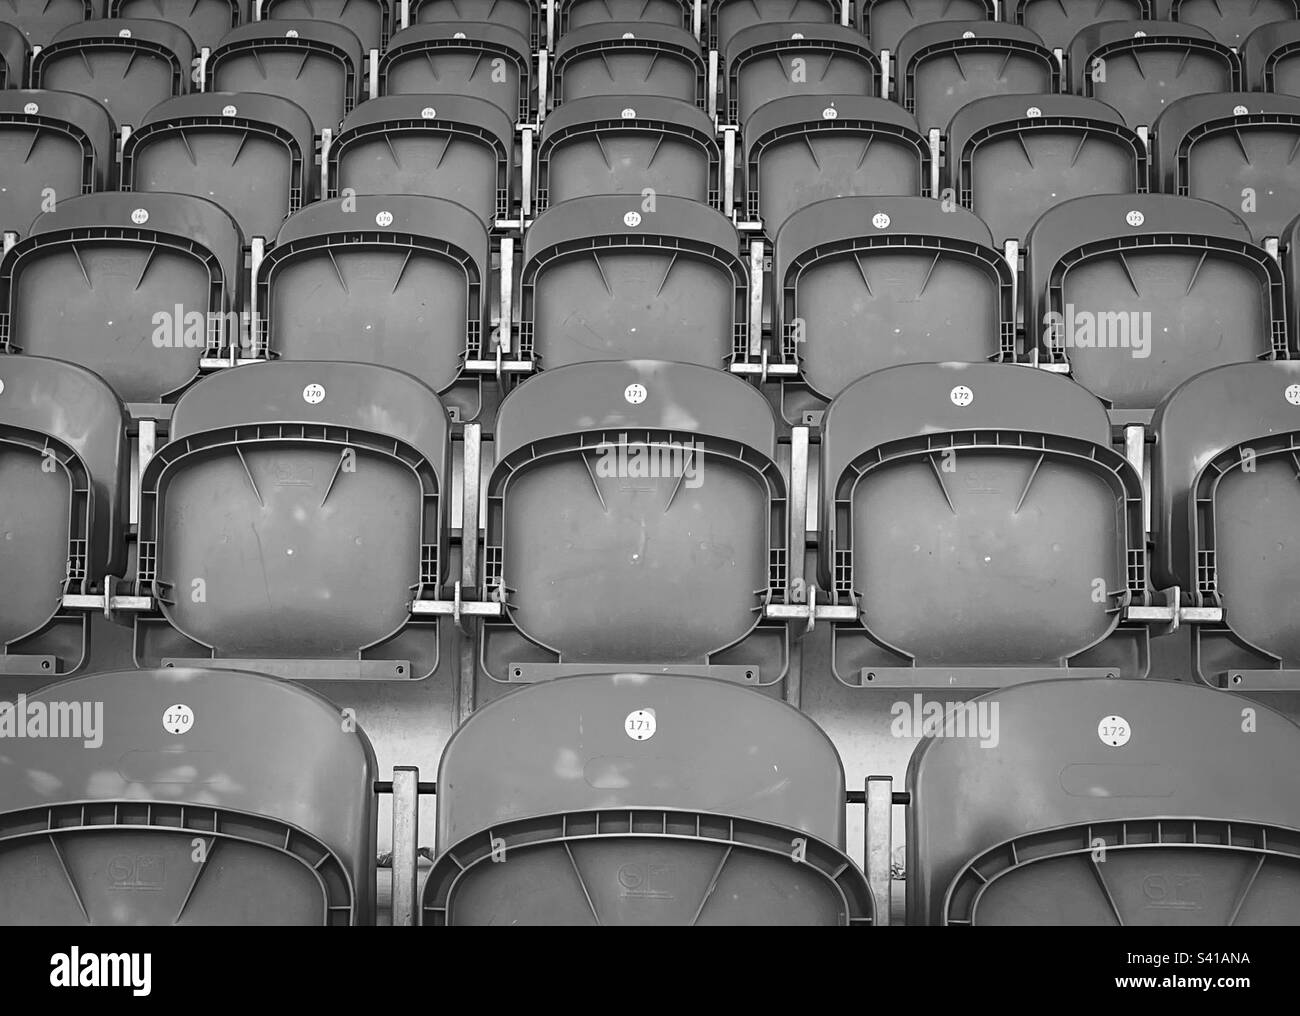 ‘Enjoy the game’ sports stadium, empty seats with no supporters (Black & White) Stock Photo